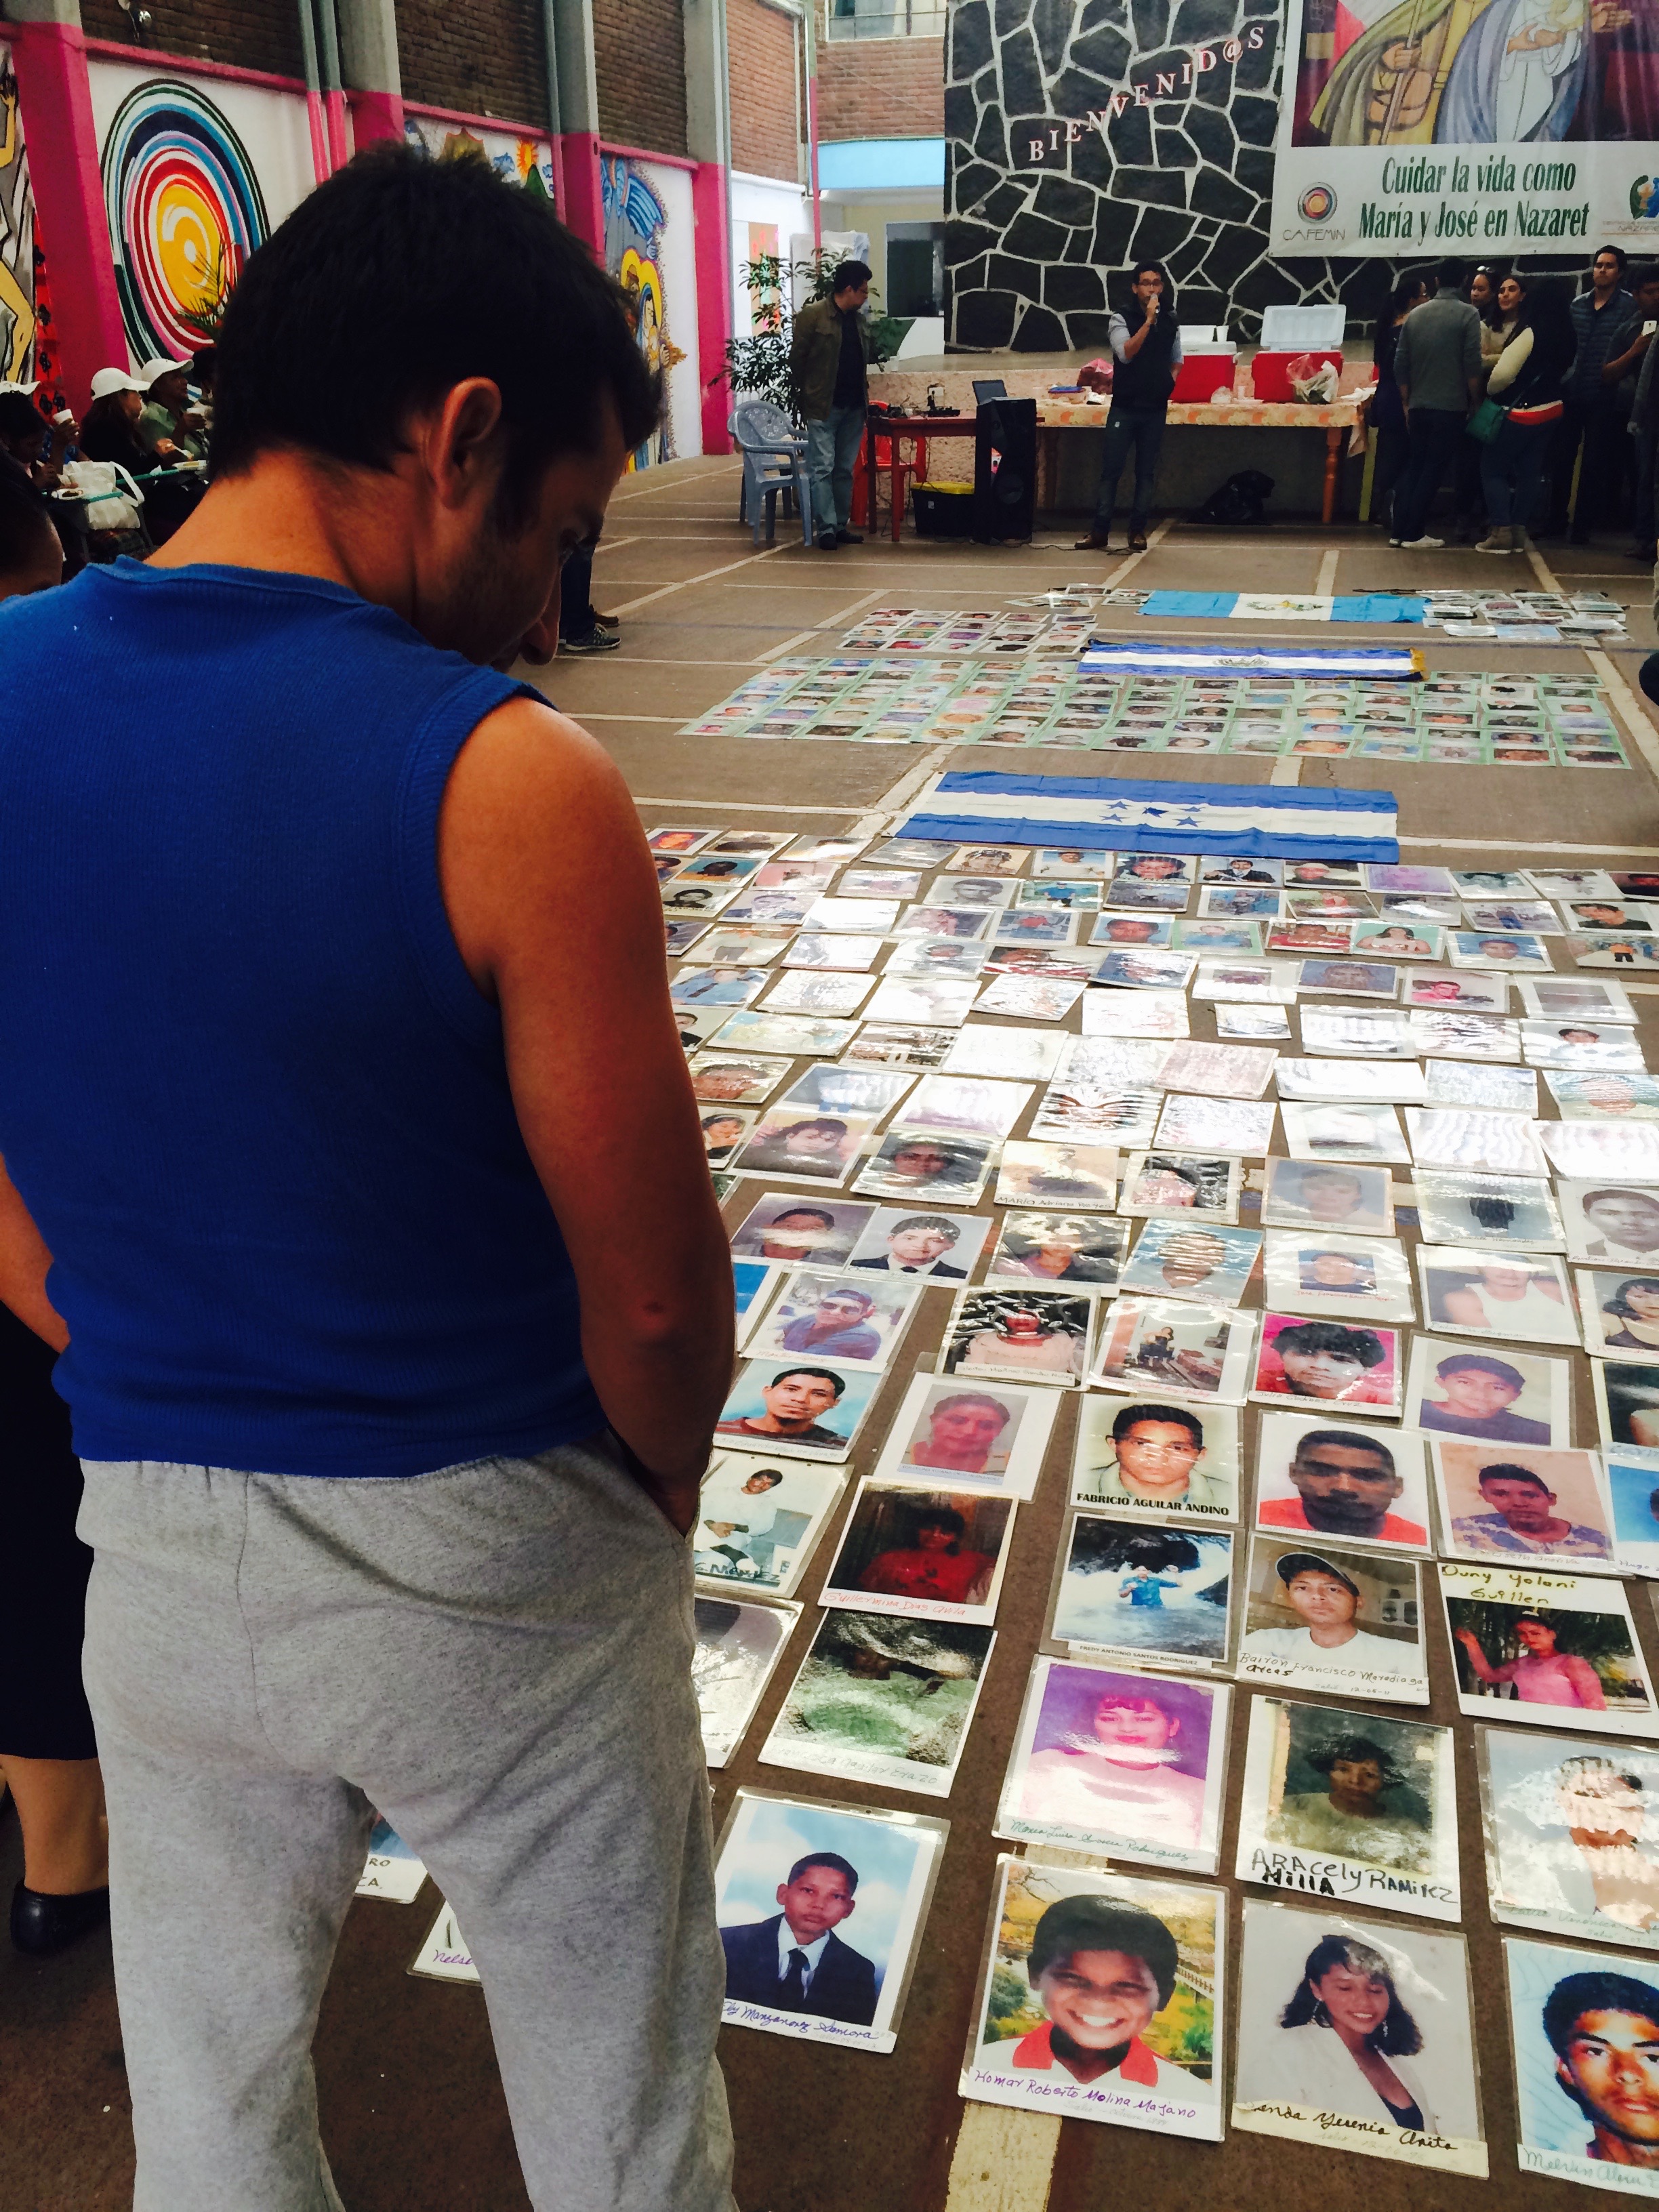 The Silent Drama of the Disappeared